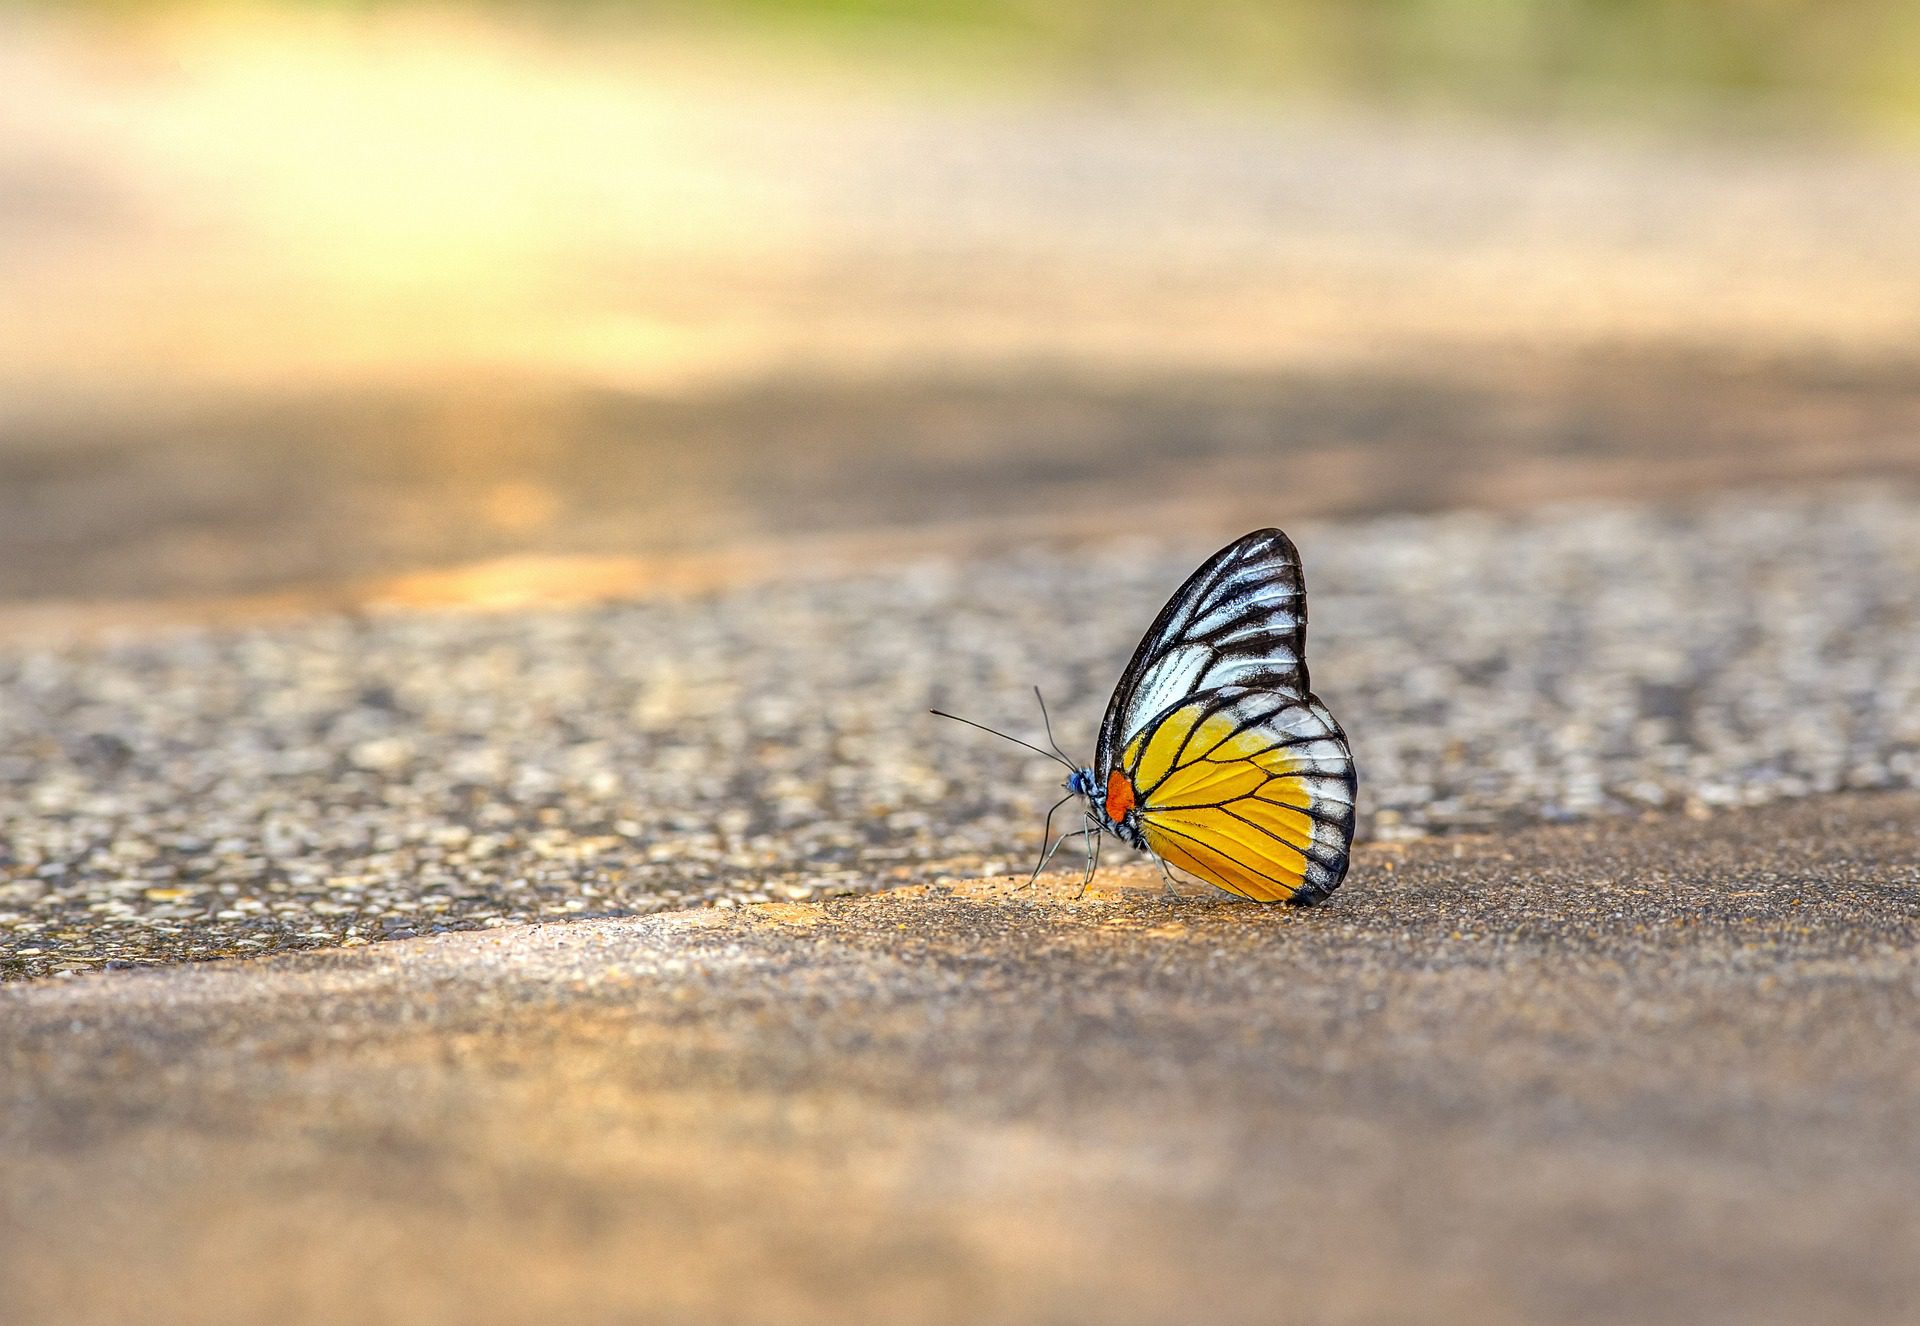 30 Beautiful Facts About Butterflies - The Fact Site